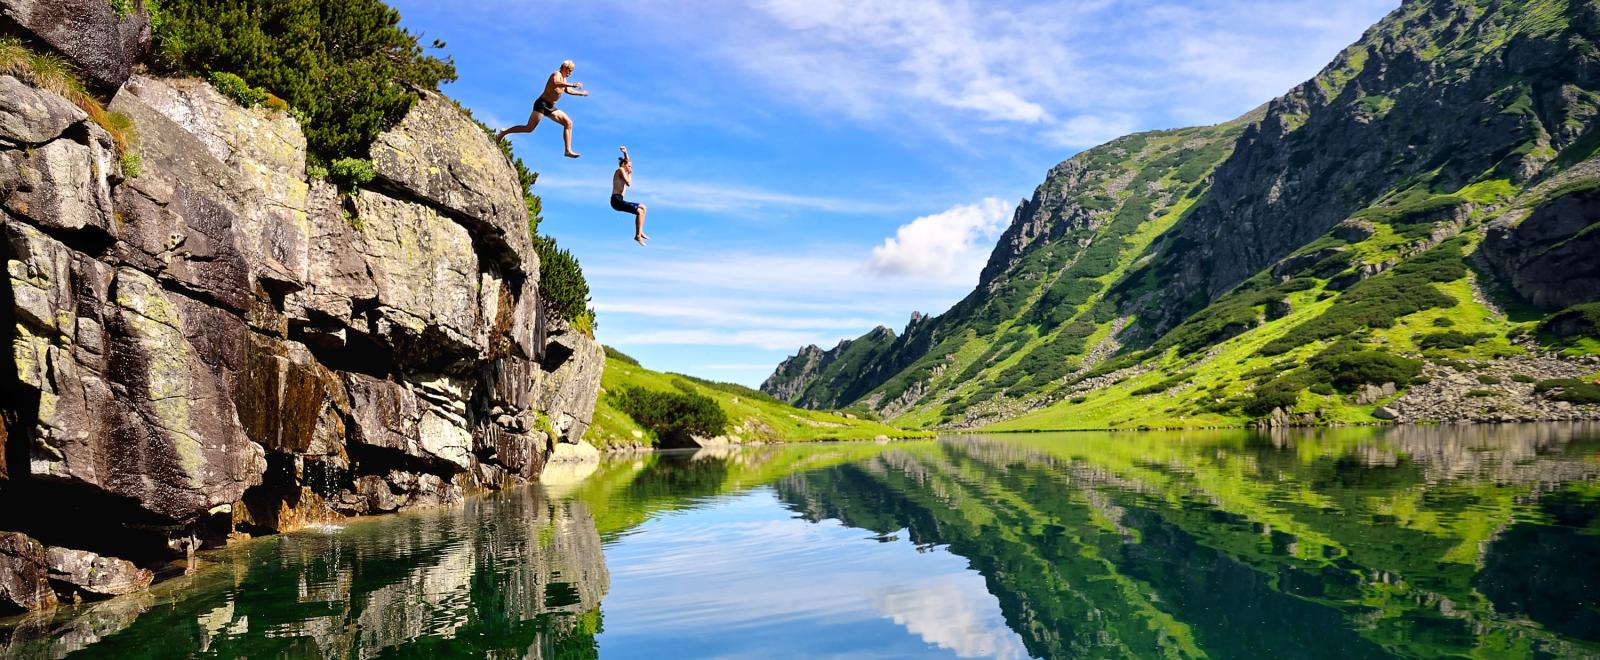 Two travellers enjoy their adventure by jumping off a cliff into water